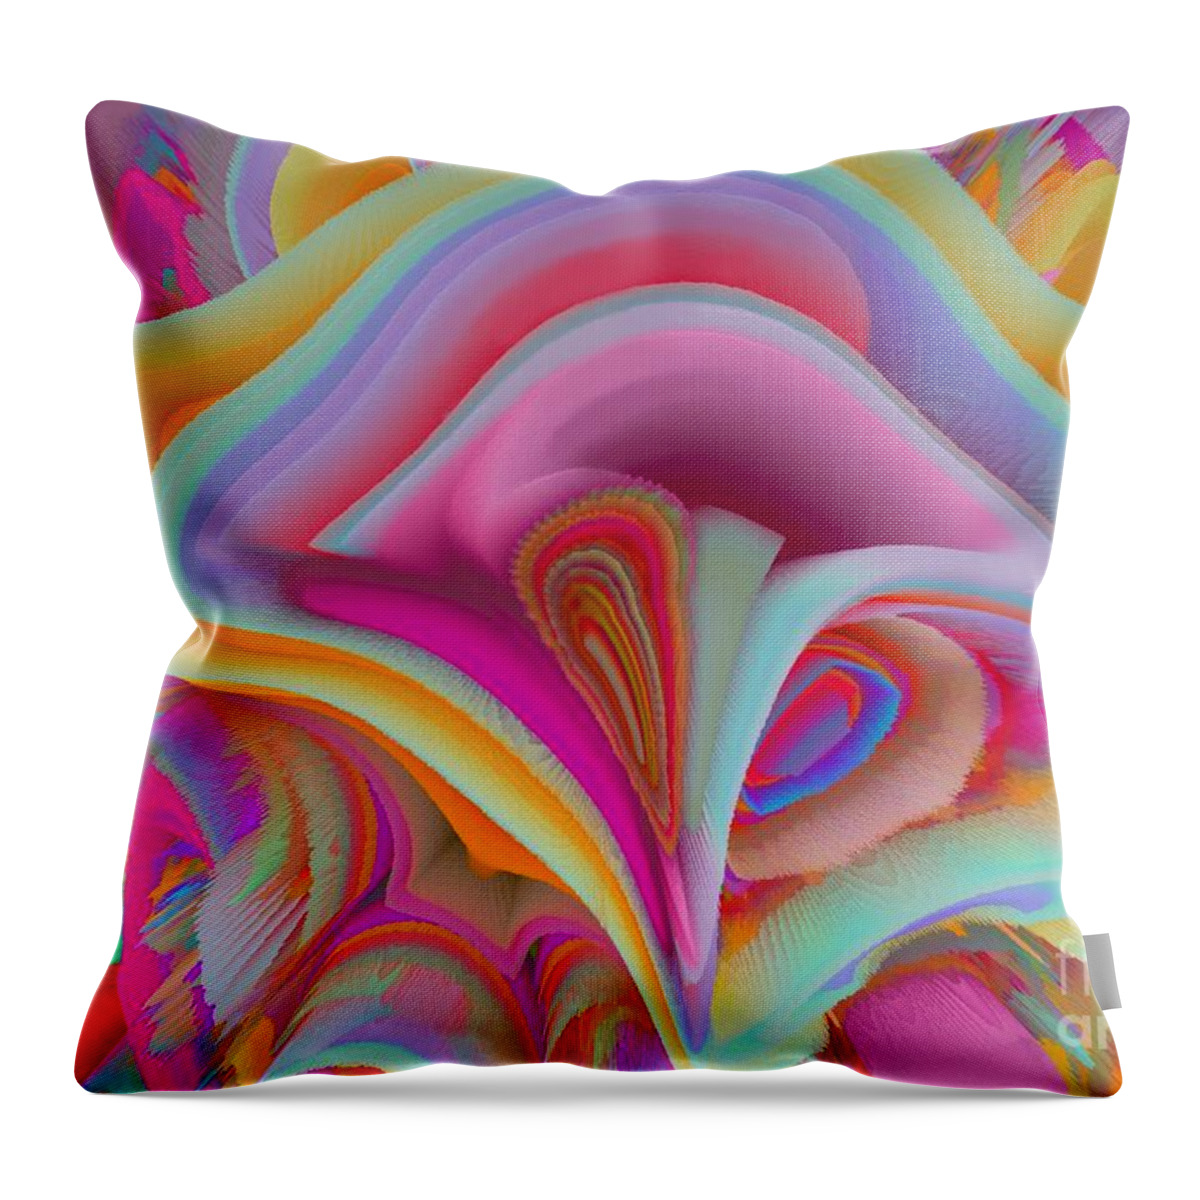 Rainbow Throw Pillow featuring the mixed media A Flower In Rainbow Colors Or A Rainbow In The Shape Of A Flower 4 #1 by Elena Gantchikova